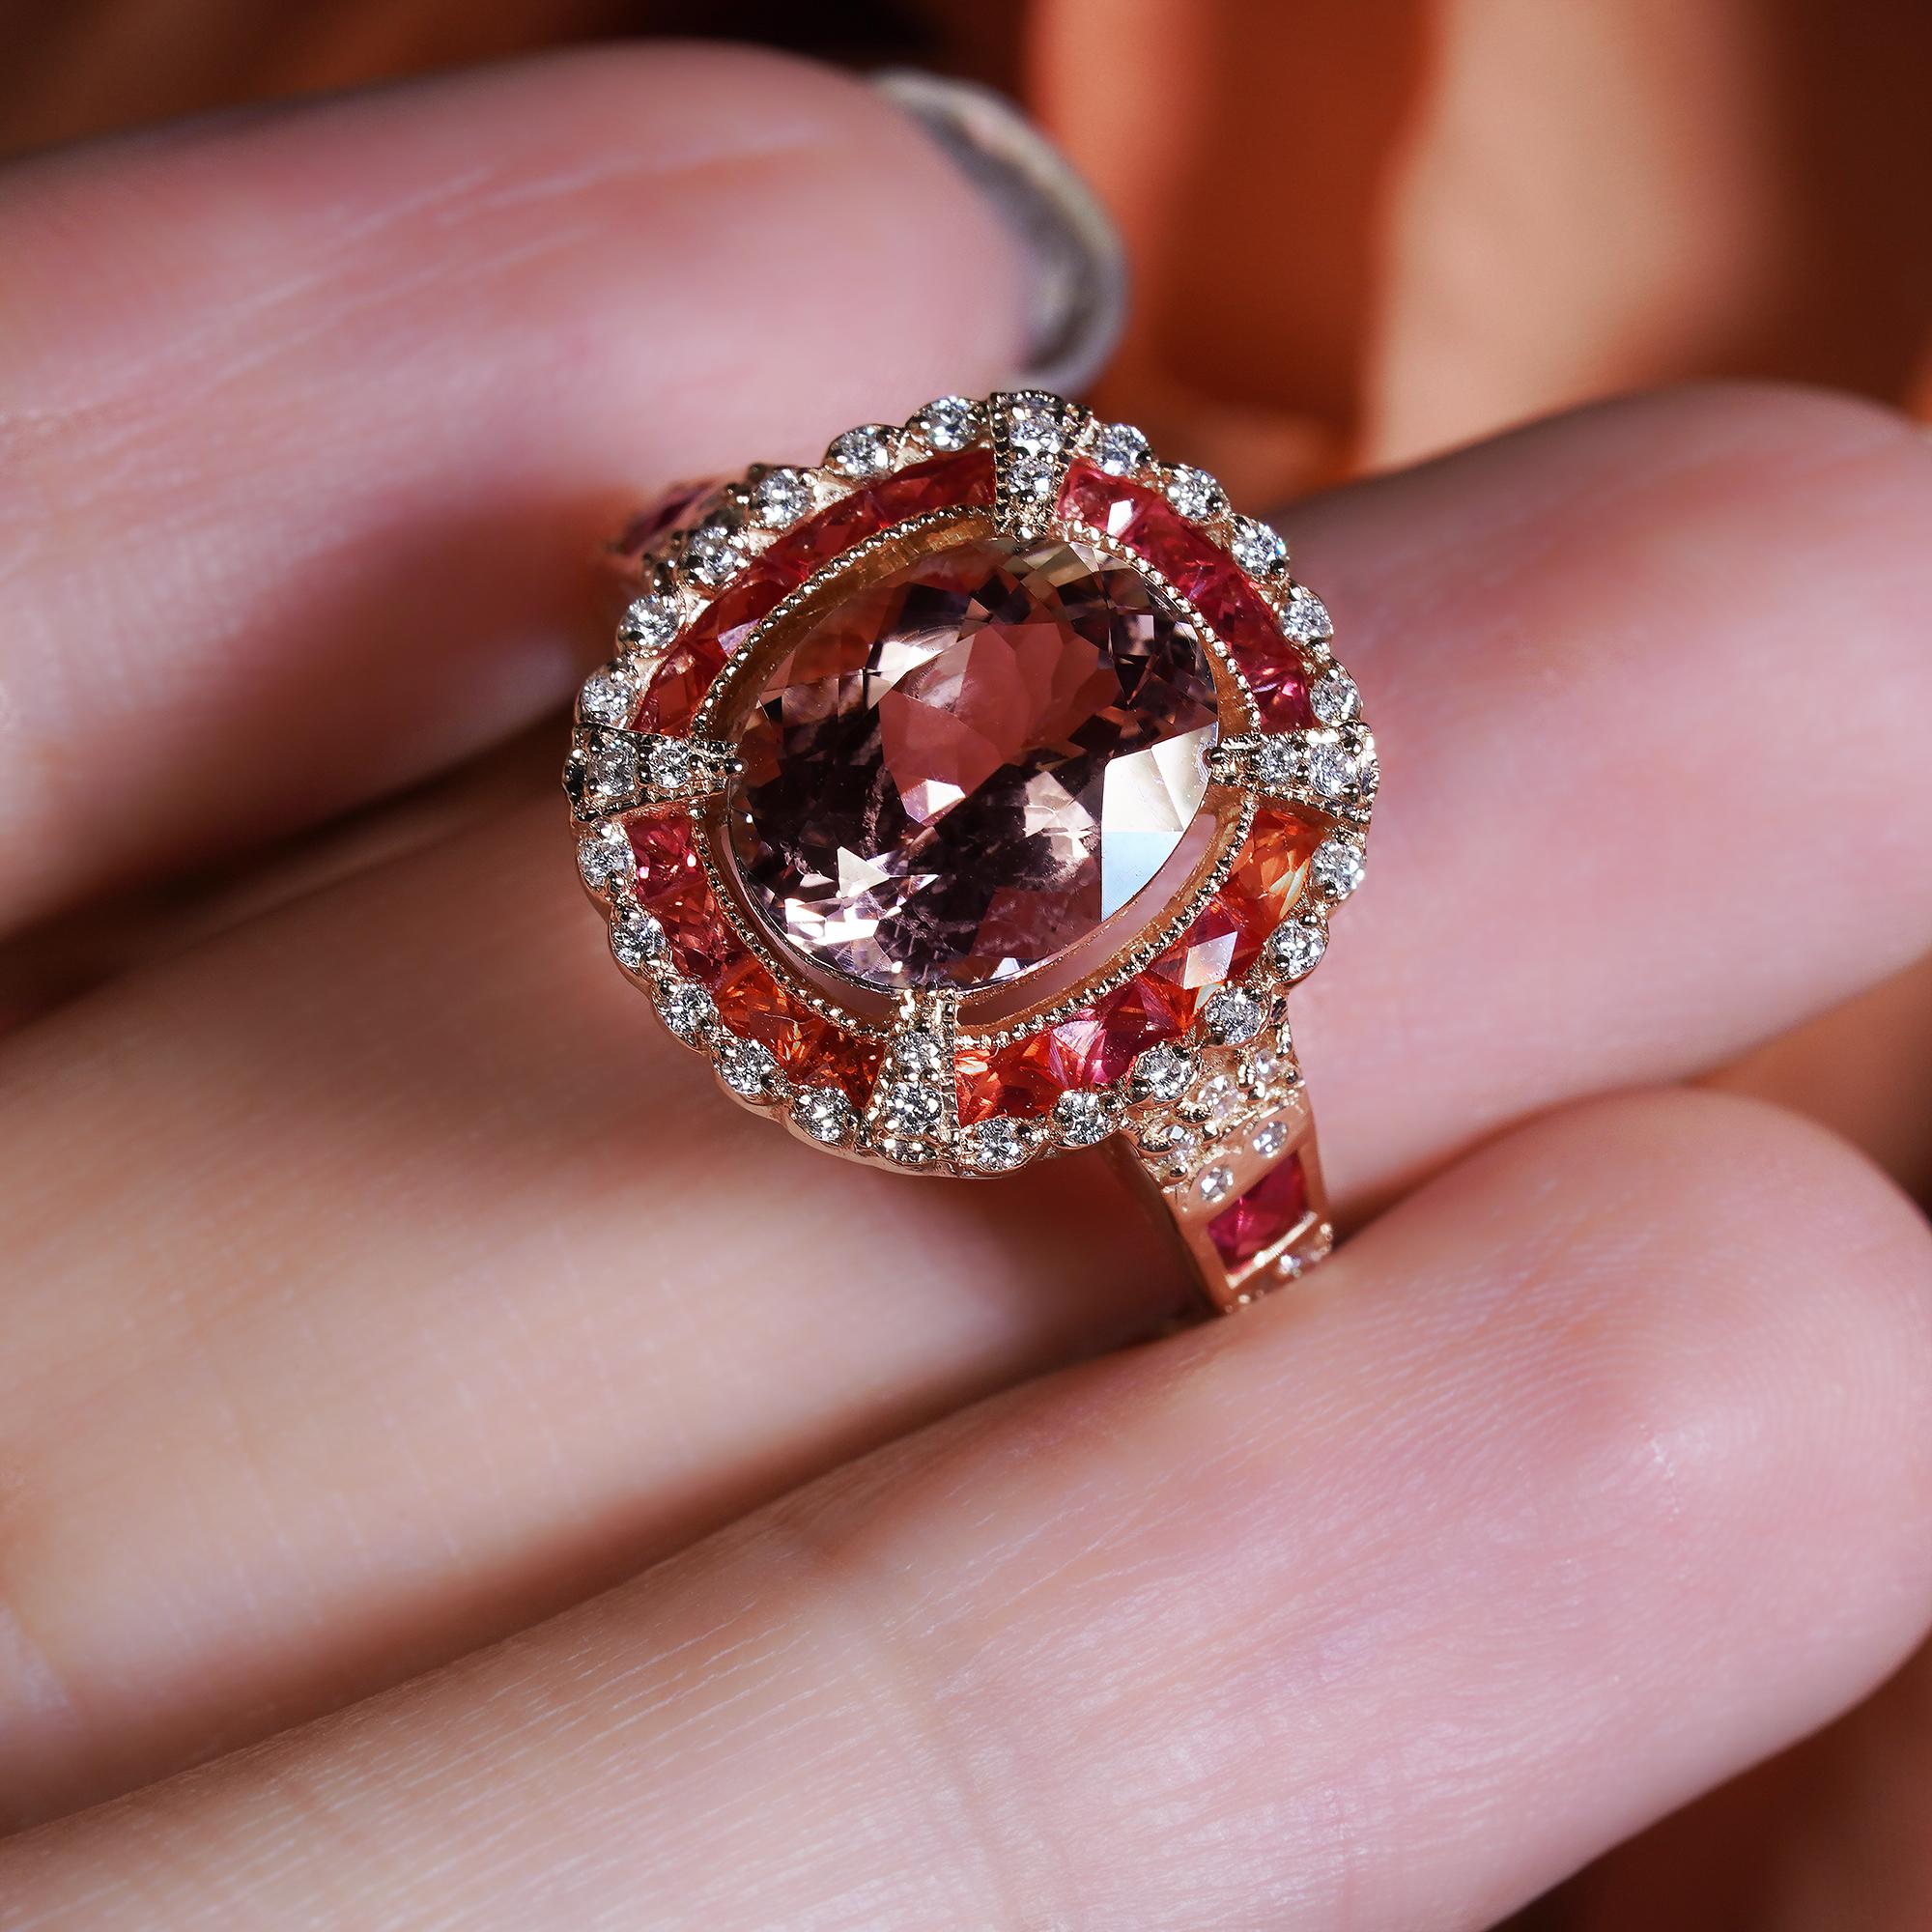 This stylish 2.44 ct. Oval Morganite with Orange Sapphire and Diamond in 14K Rose Gold Ring will lend an eye-catching touch of sparkle to your look. Crafted in lustrous rose gold, the ring features an oval-cut morganite gemstone surrounded with